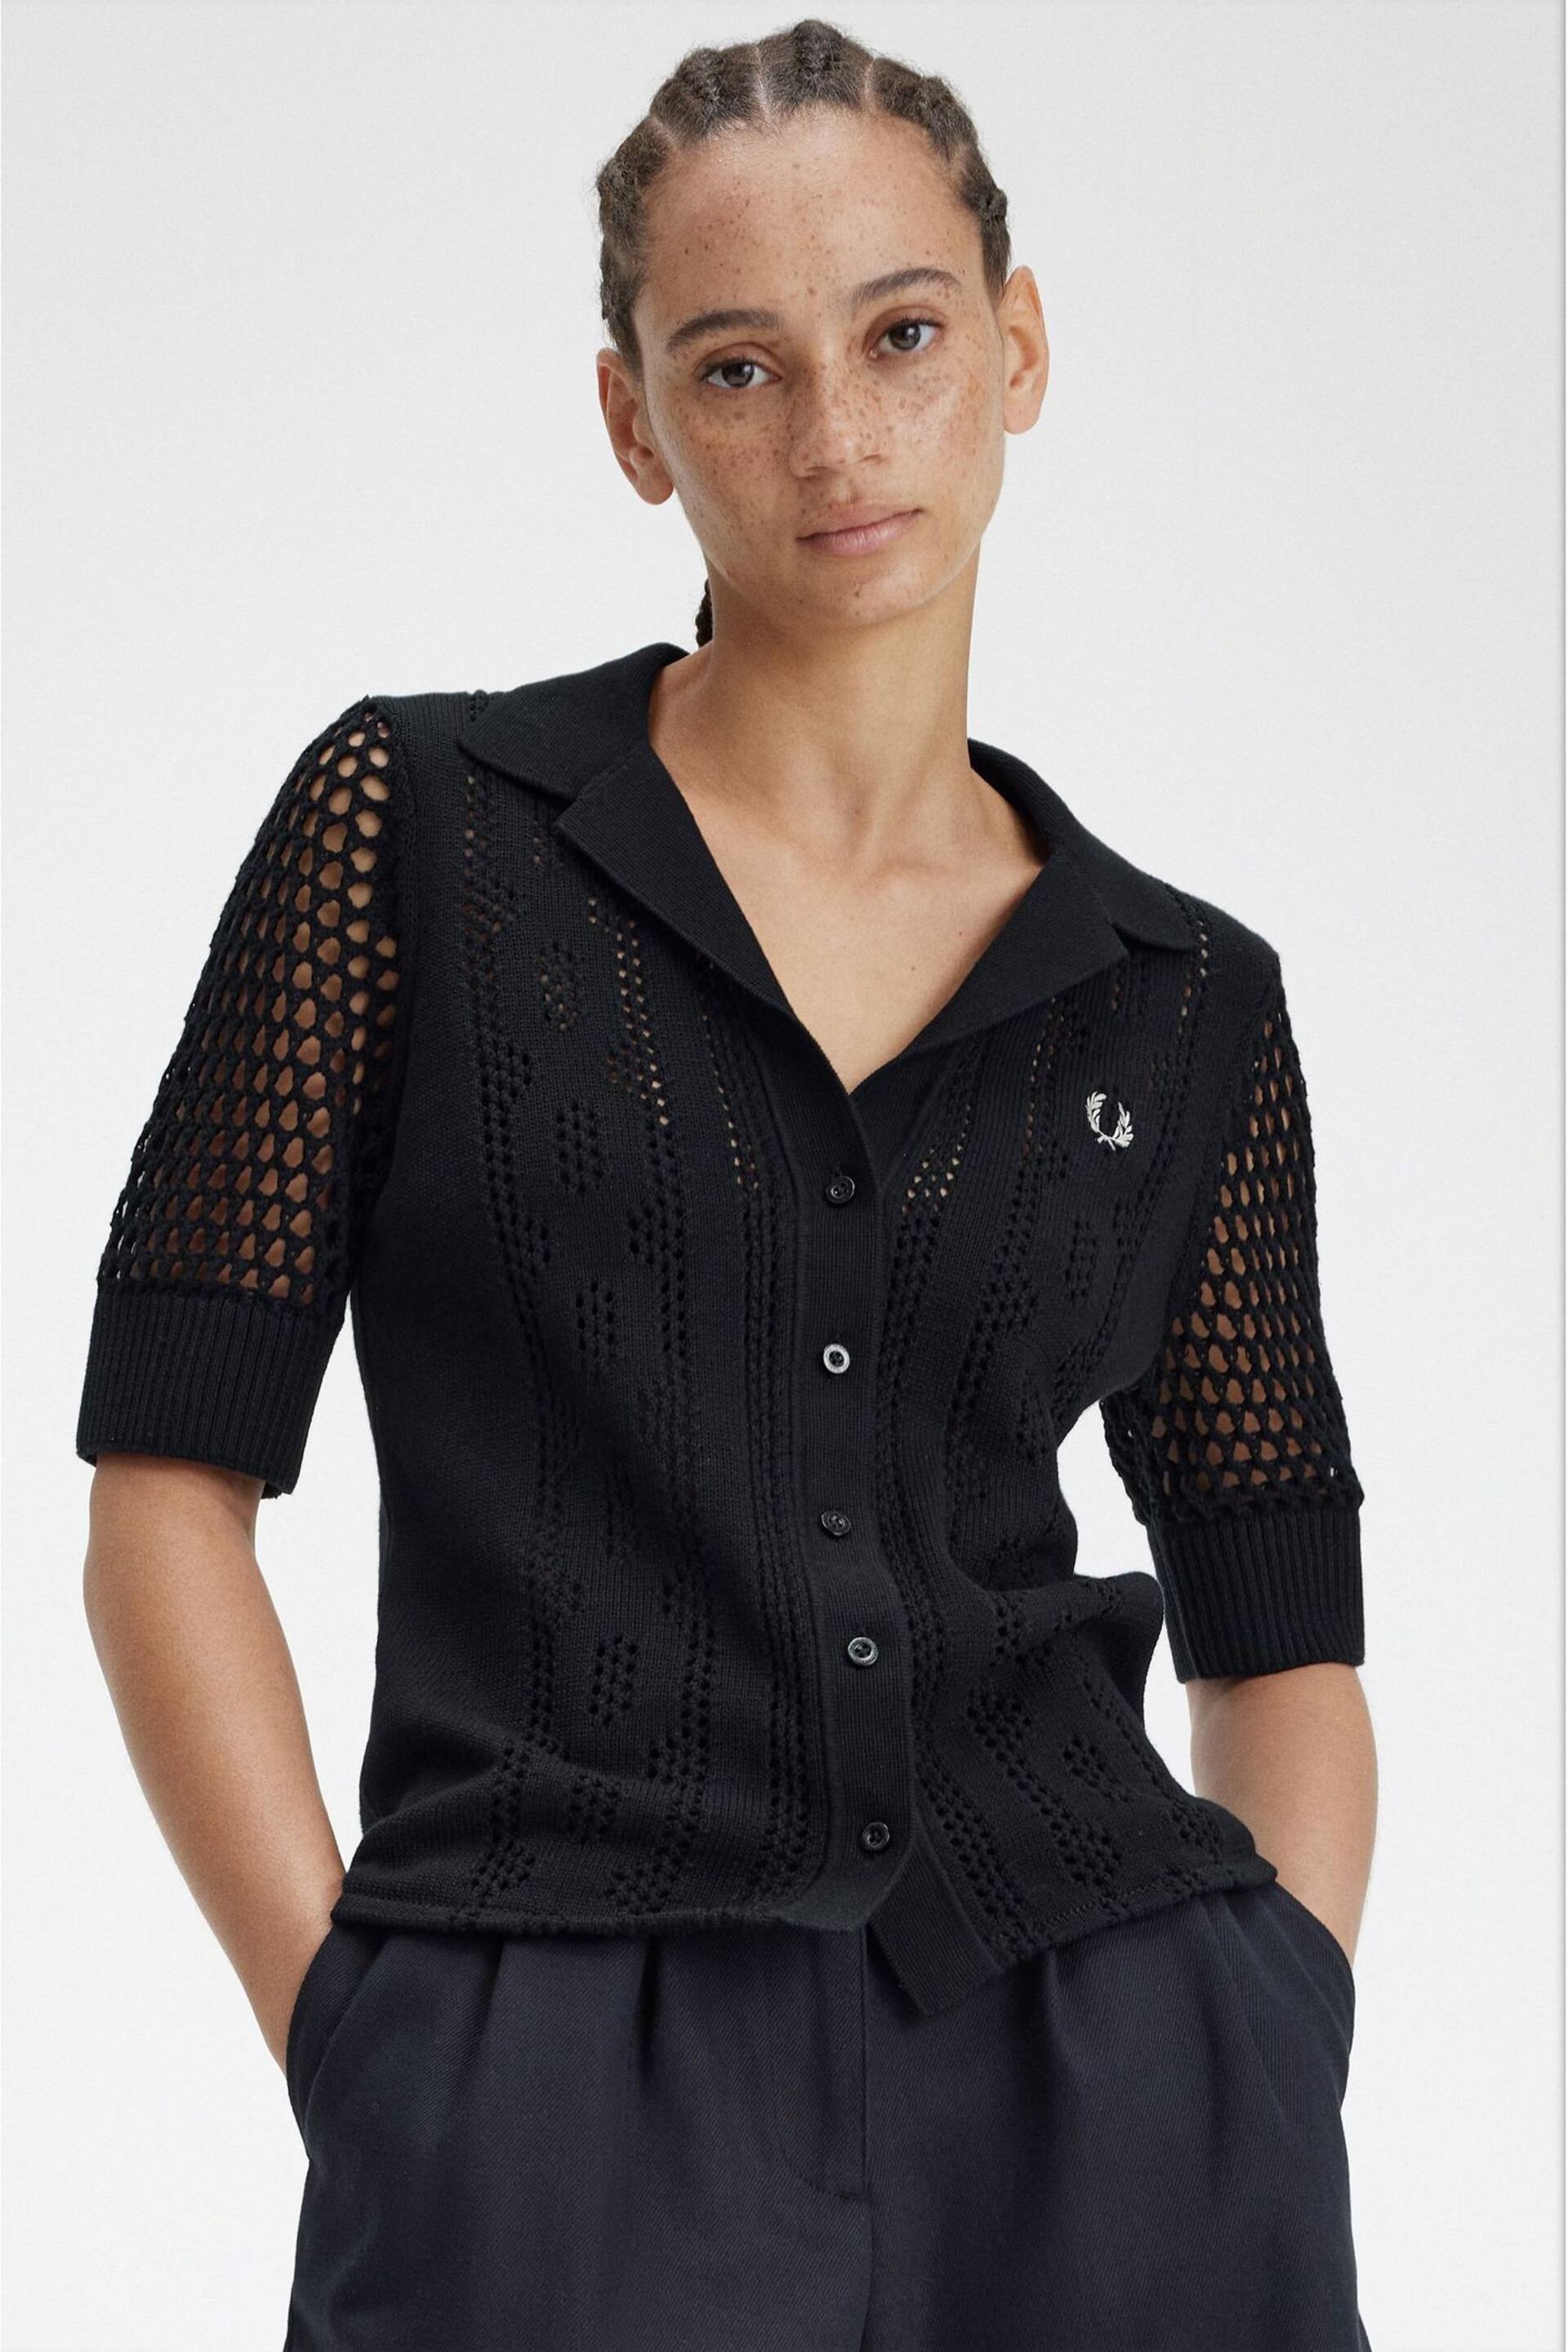 Fred Perry Open Knit Button Through Black Shirt - Image 1 of 5